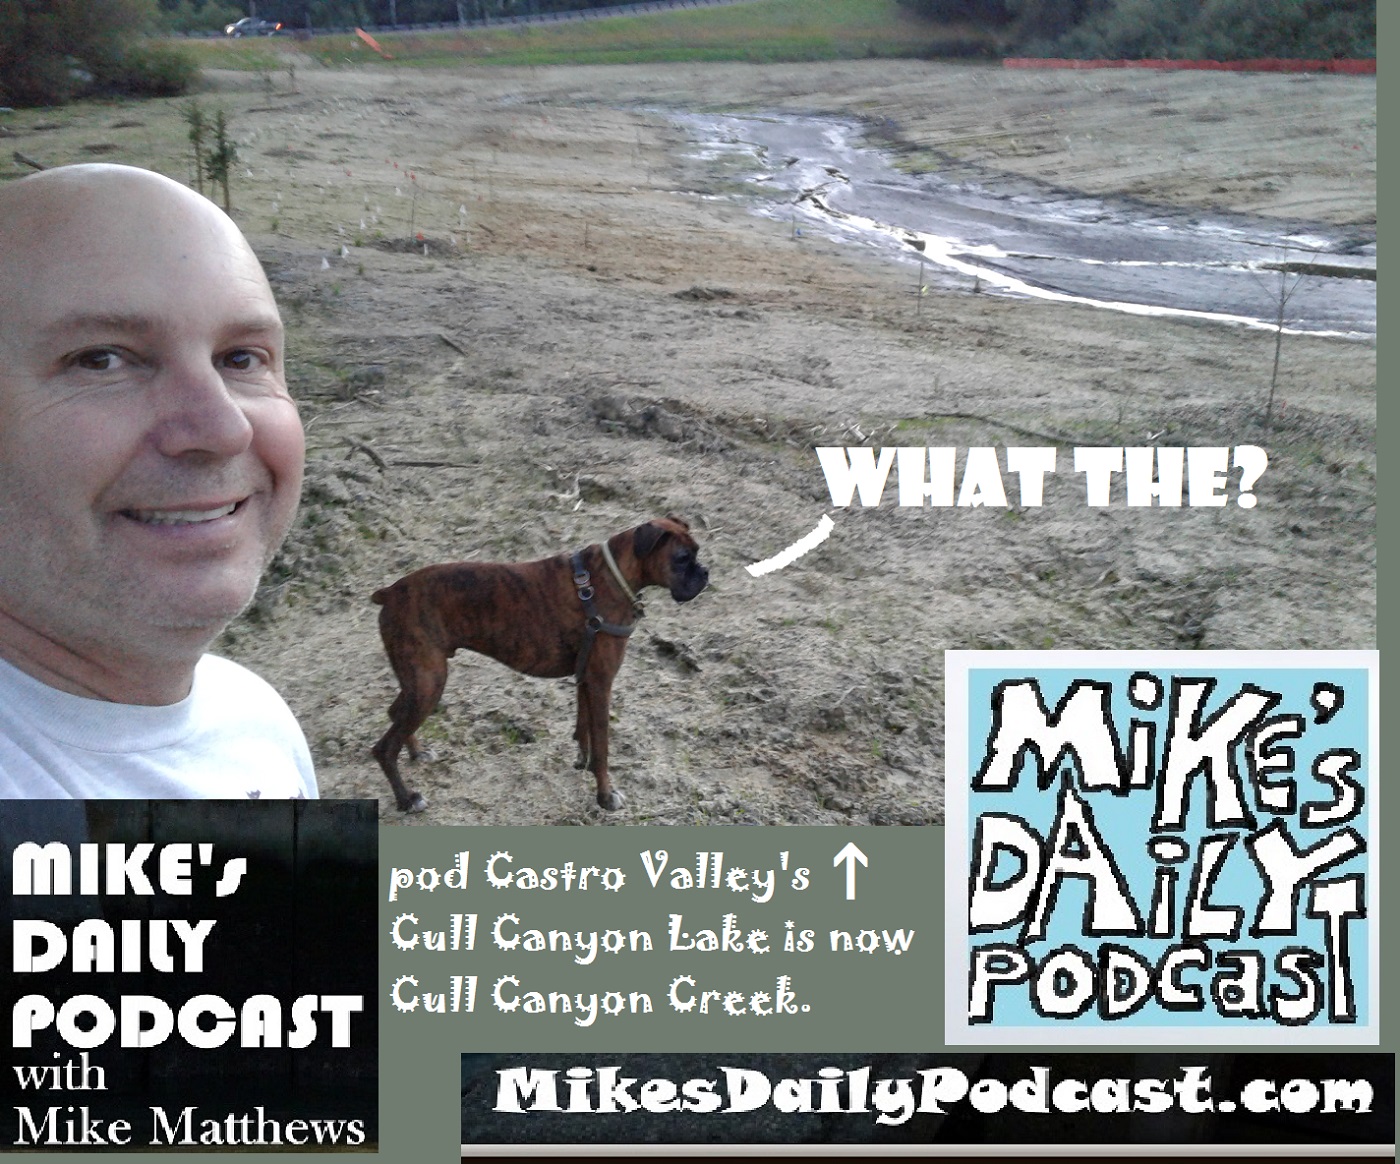 mikes-daily-podcast-1217-cull-canyon-lake